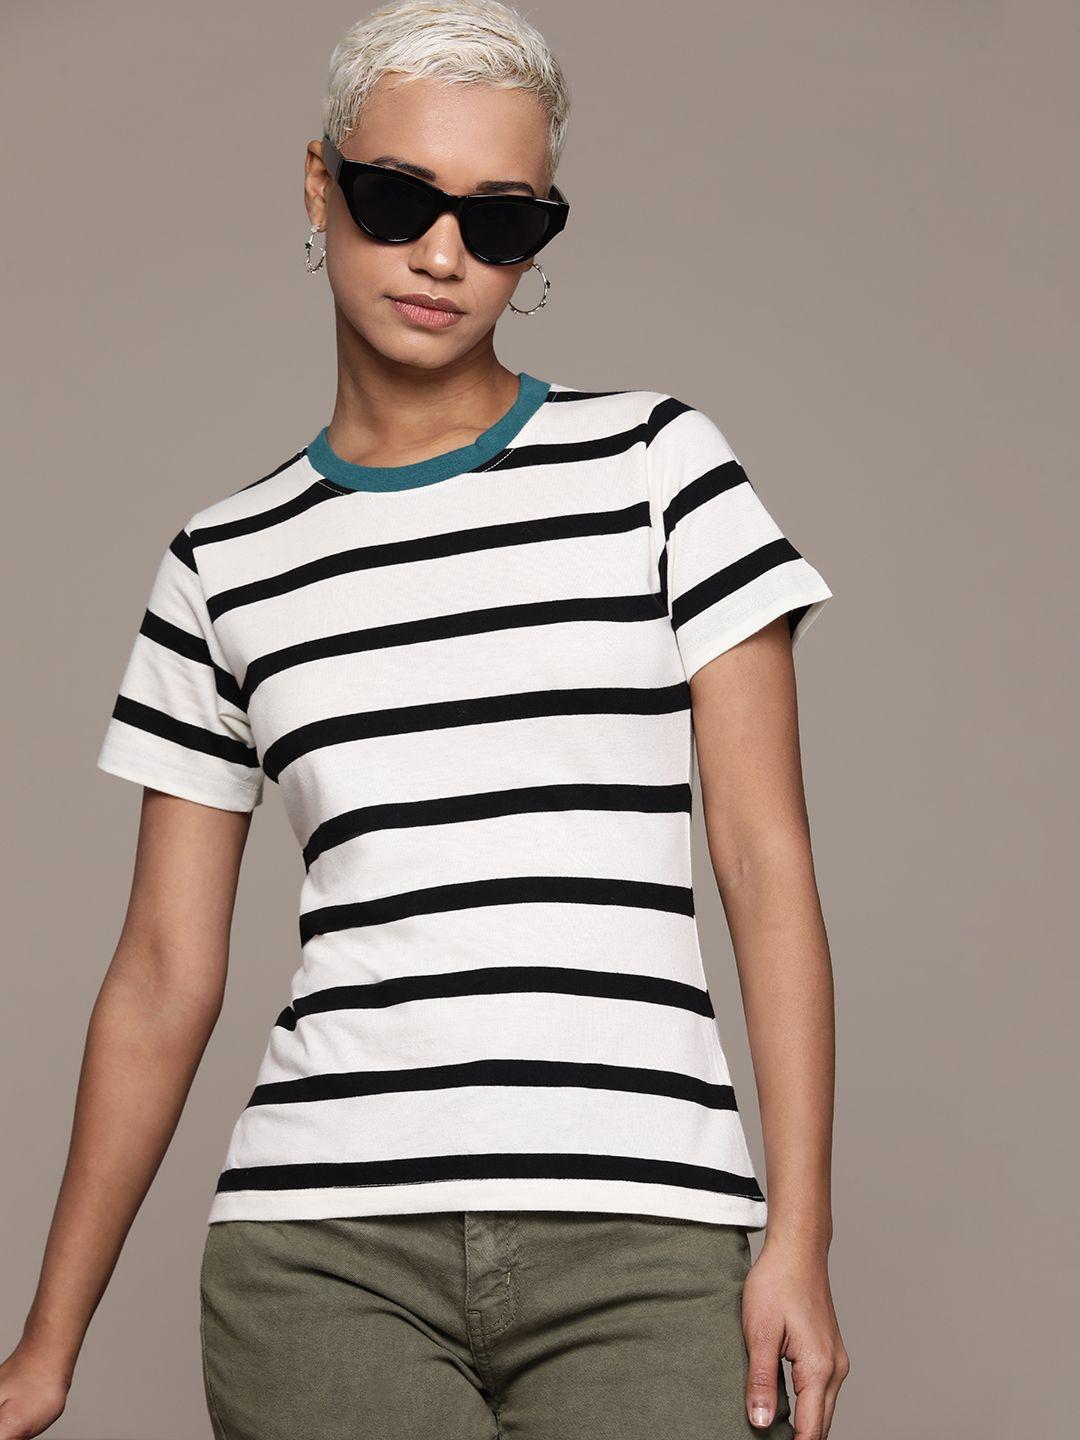 the roadster lifestyle co. striped slim fit t-shirt